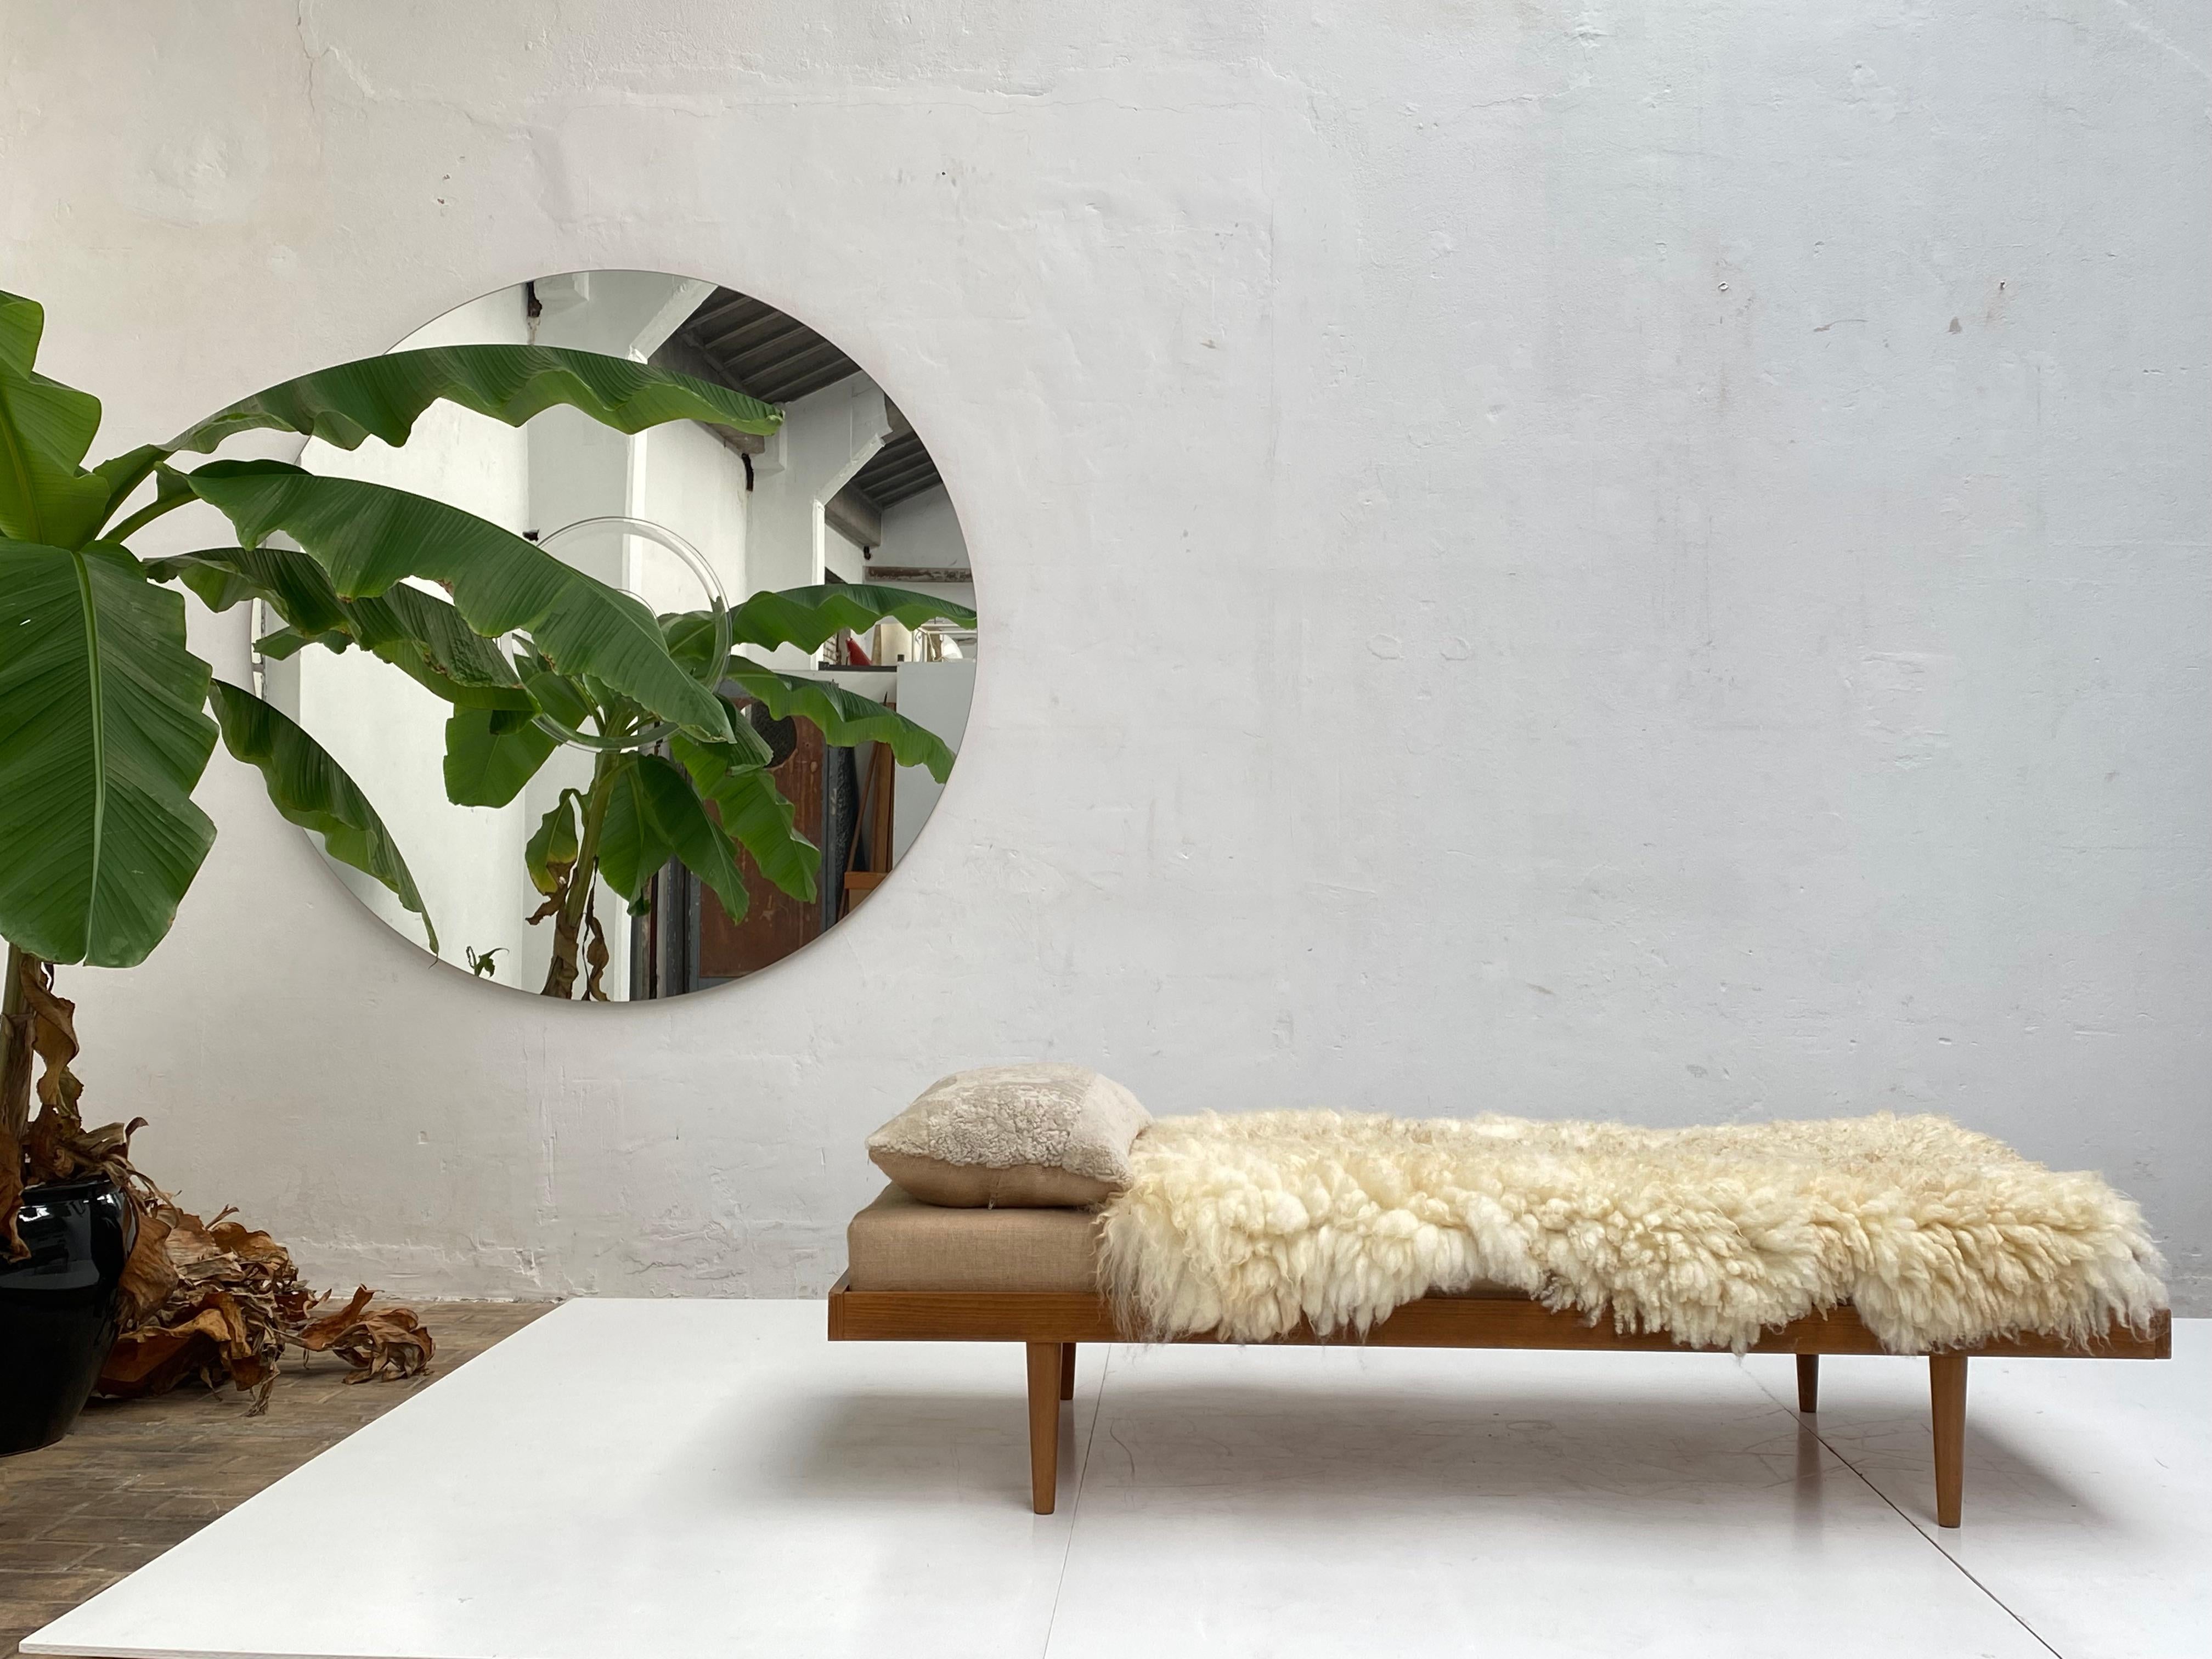 Sheepskin 1950's Danish Teak Daybed with Felted Wensleydale Texel Sheep Wool & Raw Cotton